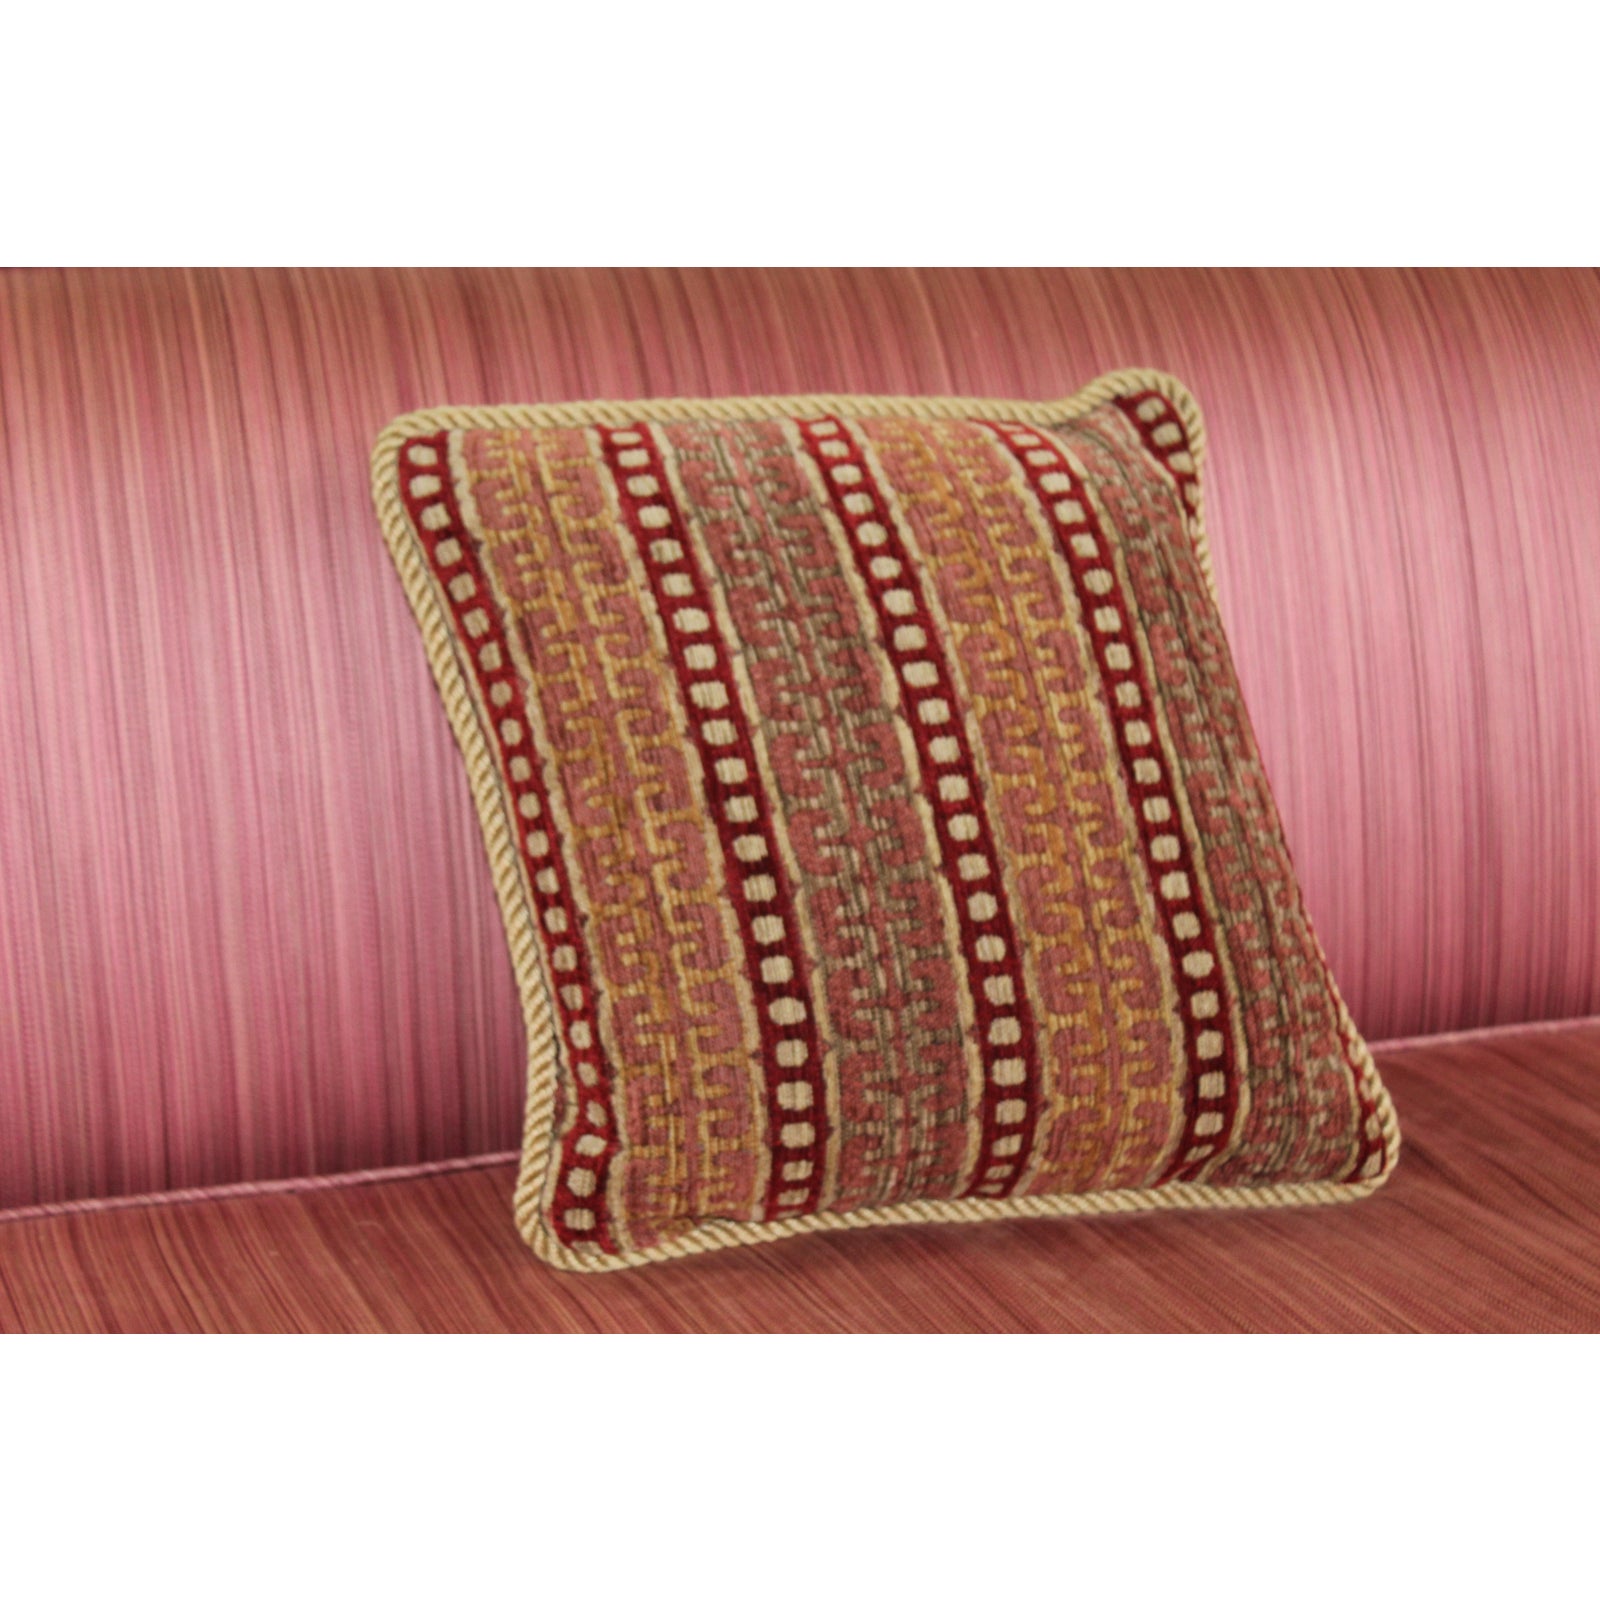 20th-century-contemporary-back-support-pillow-burgundy-and-gold-upholstered-decorative-pillow-8513